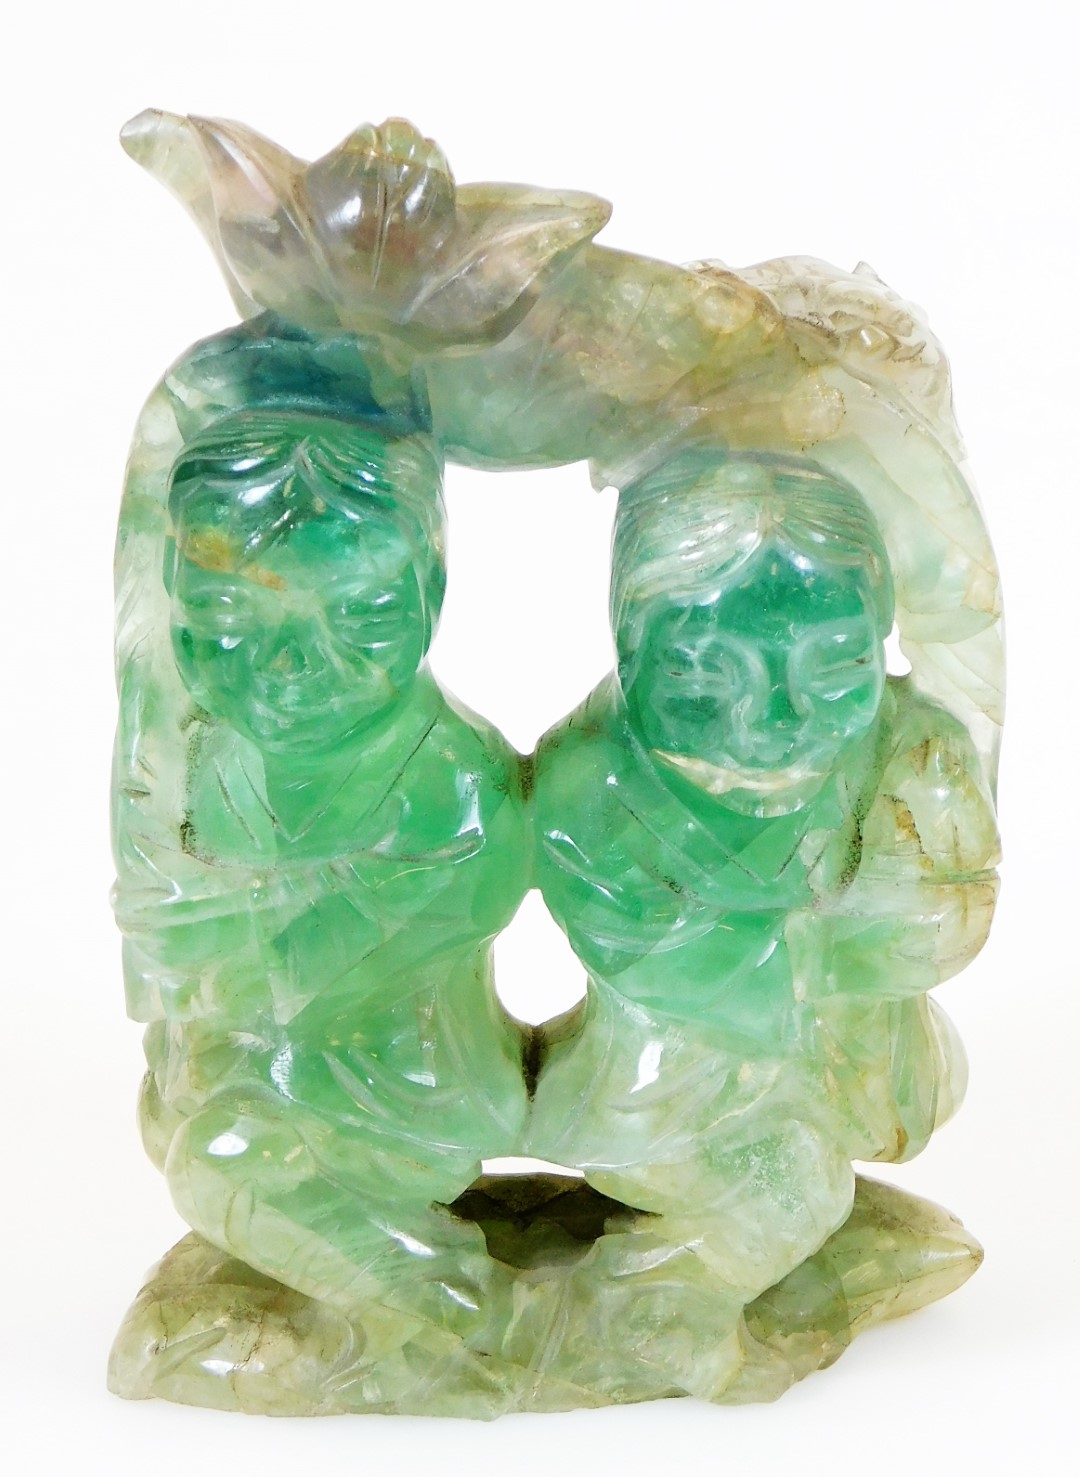 A Chinese carved green quartz sculpture of Hehe Erxian, the heavenly twins, gods of harmony and